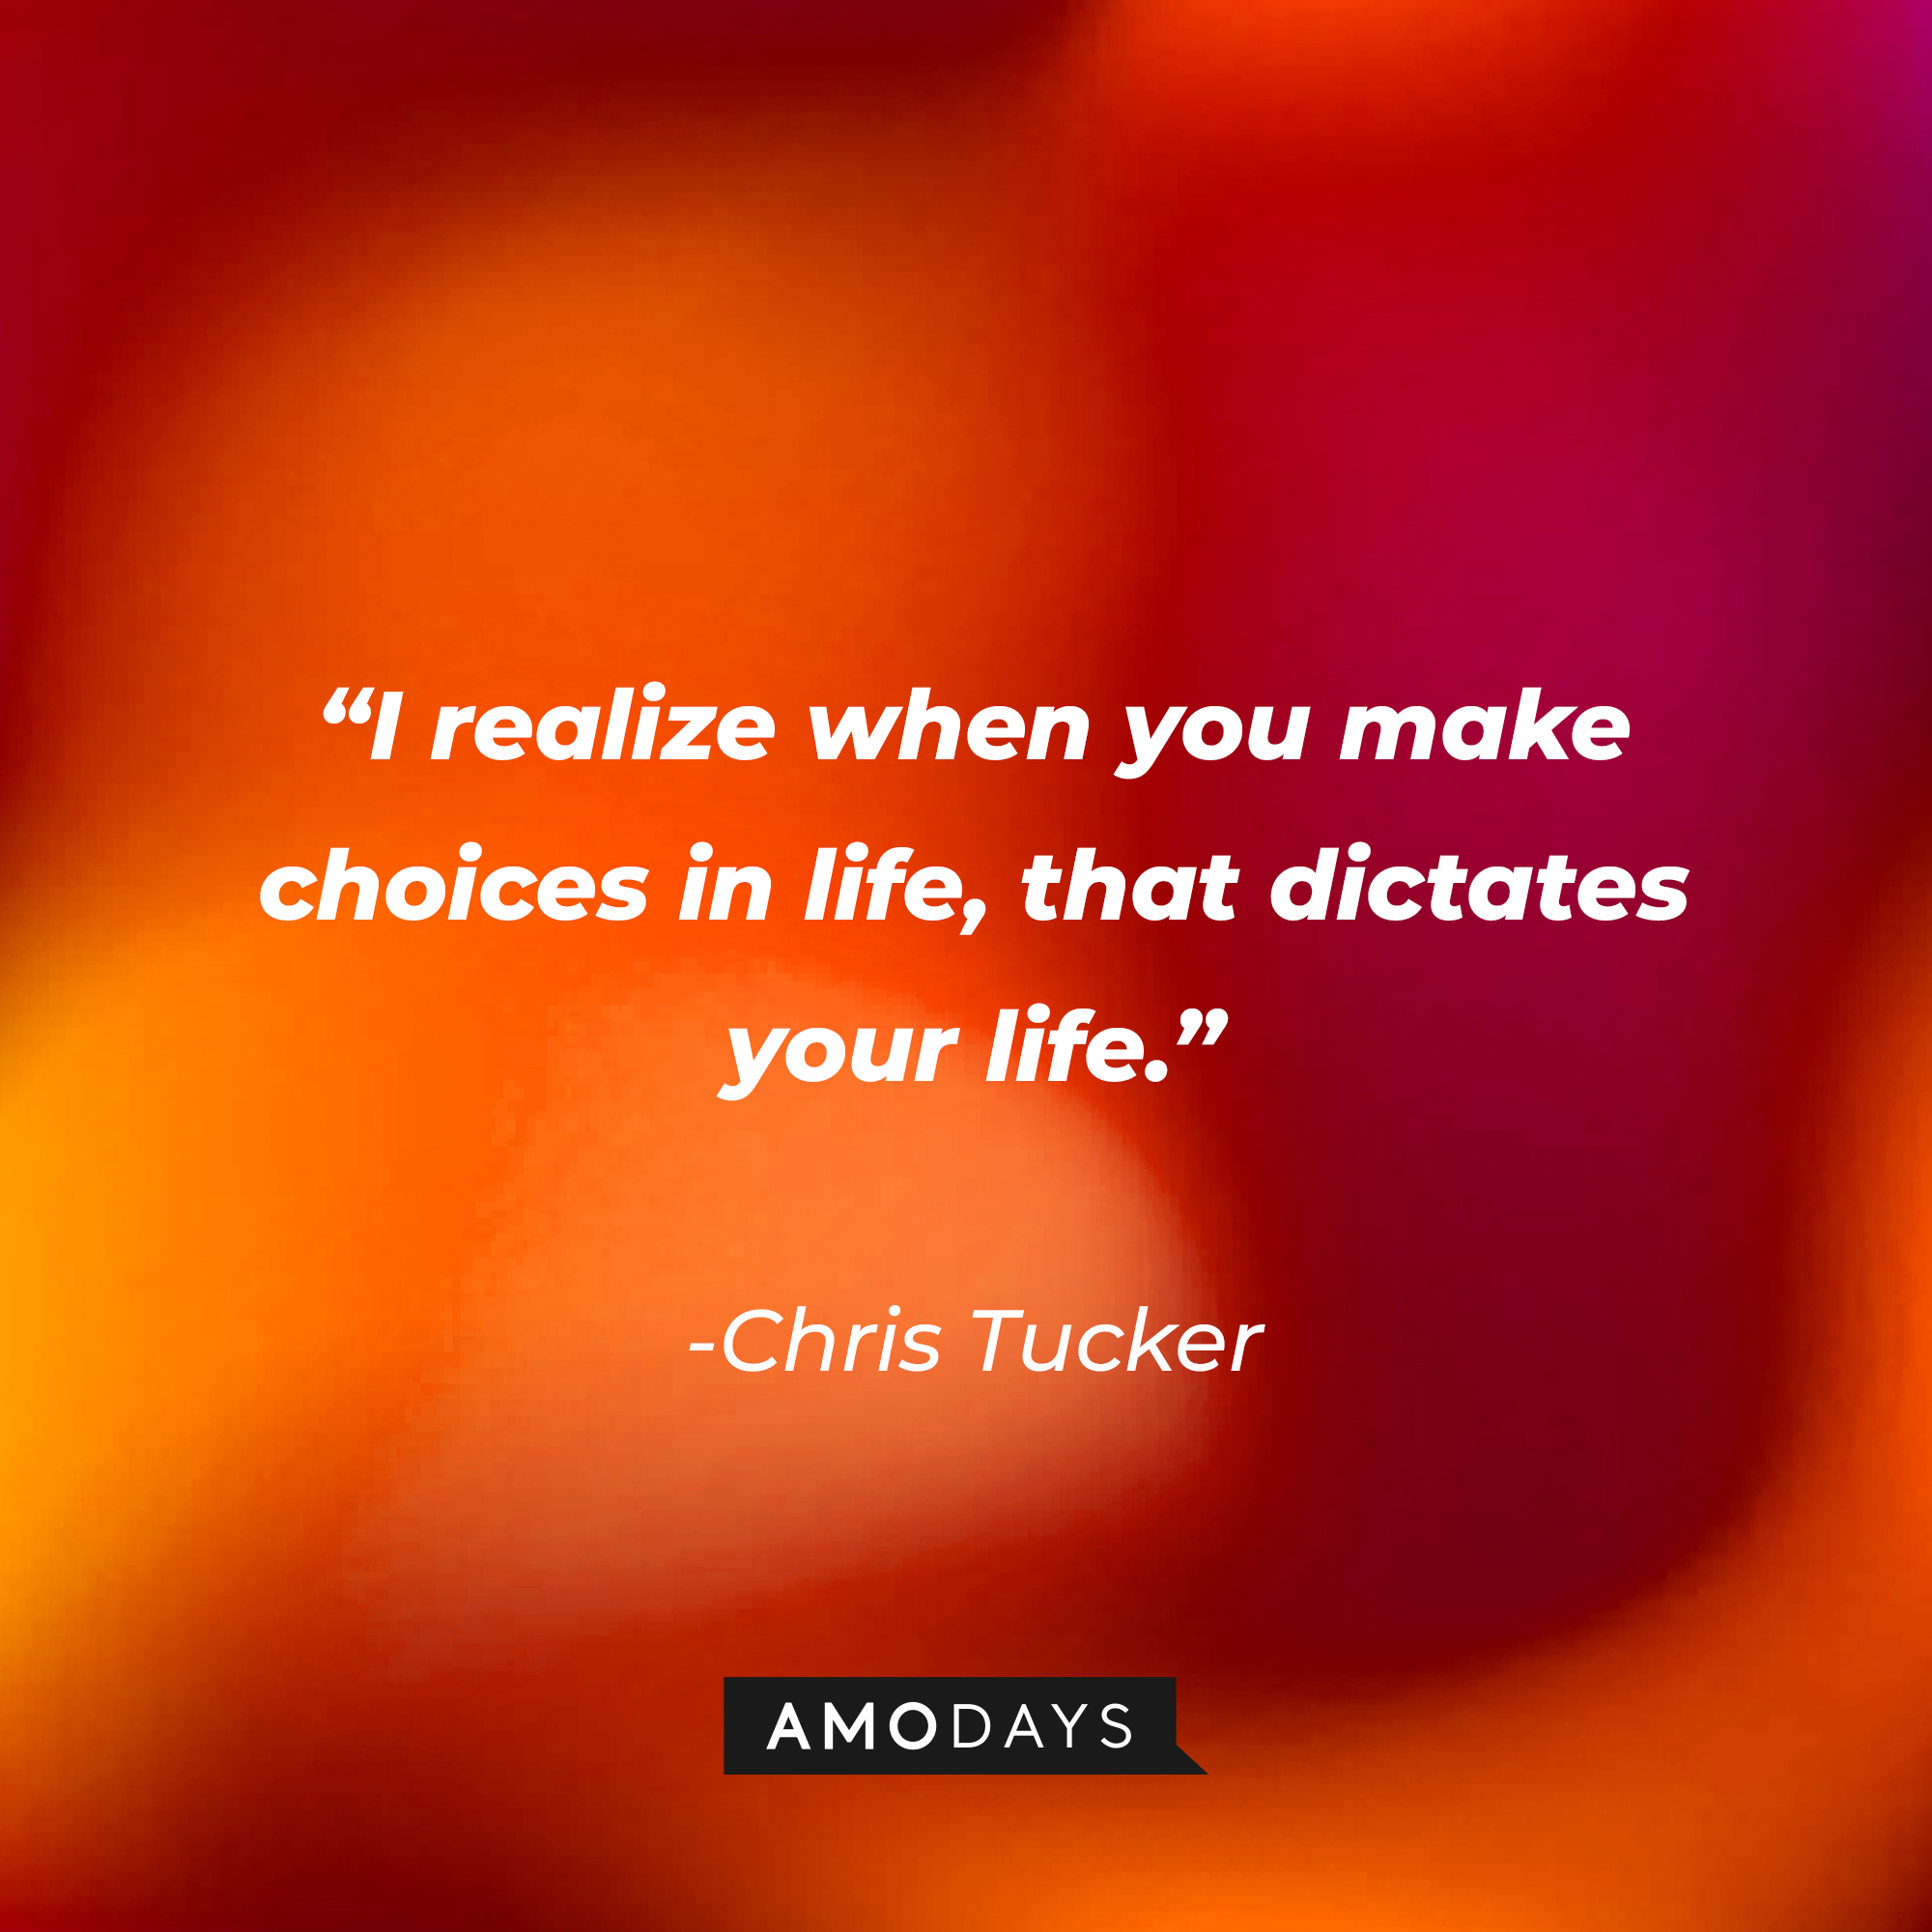 Chris Tucker’s quote: "I realize when you make choices in life, that dictates your life.”┃Source: AmoDays